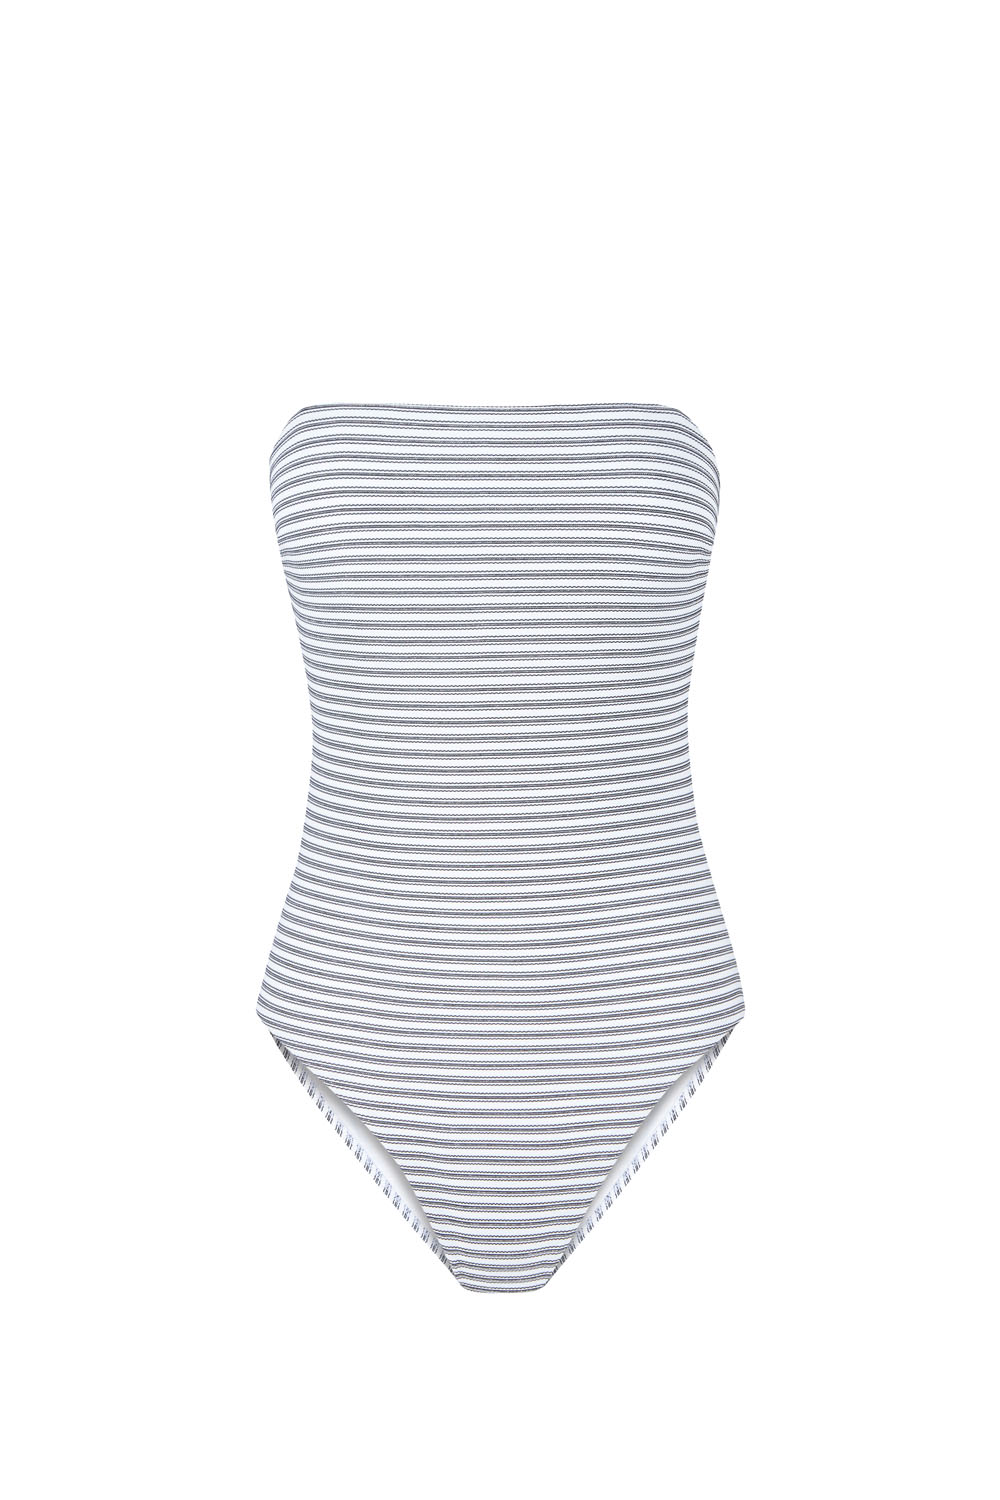 Sustainable Swimwear, recycled polyester fabric, handmade in Spain. Tubbataha swimsuit in stripes, by NOW_THEN